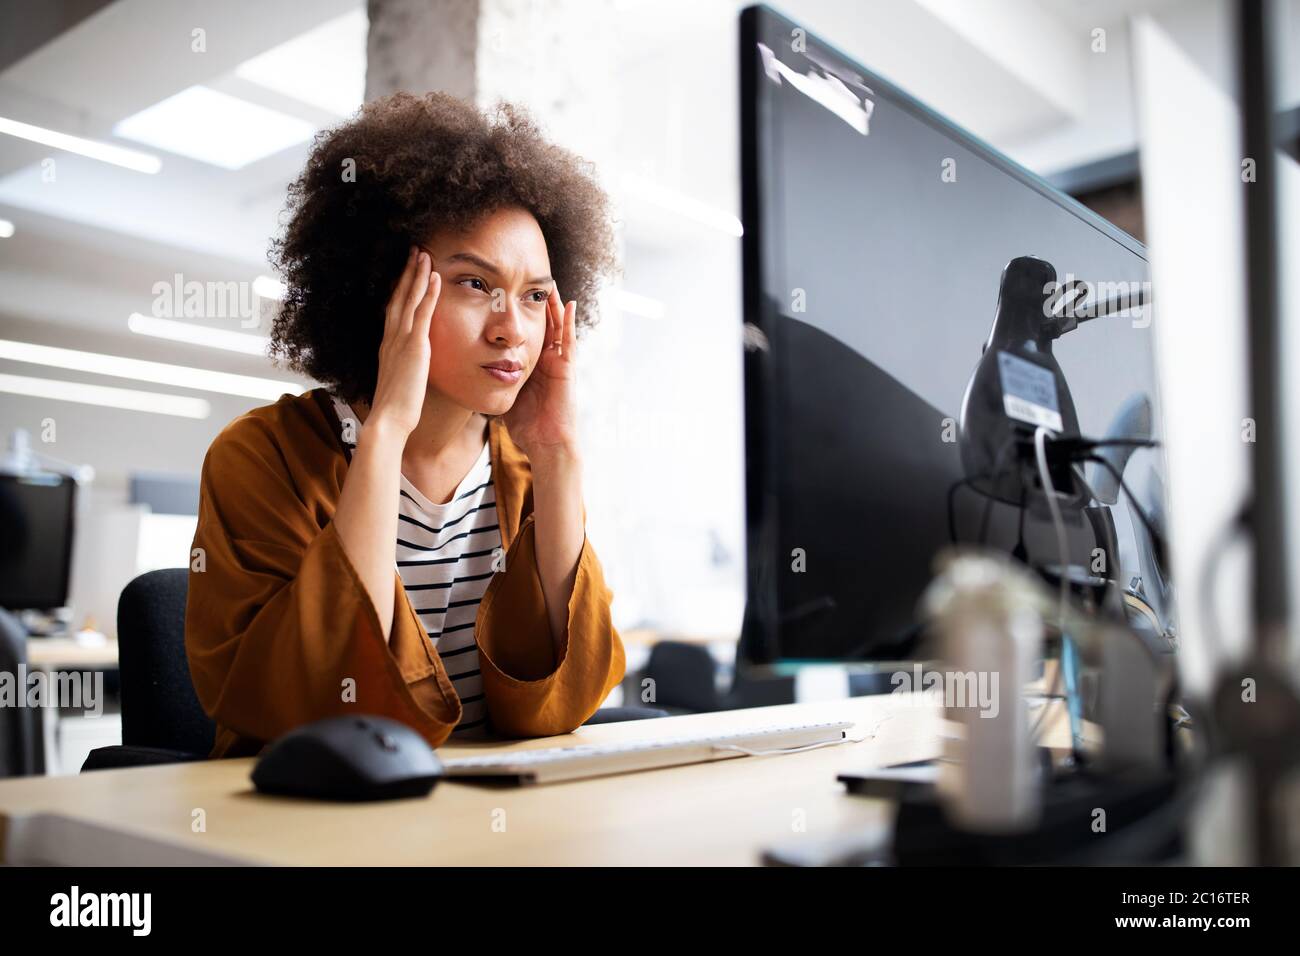 Overworked and frustrated young woman in front of computer in office Stock Photo